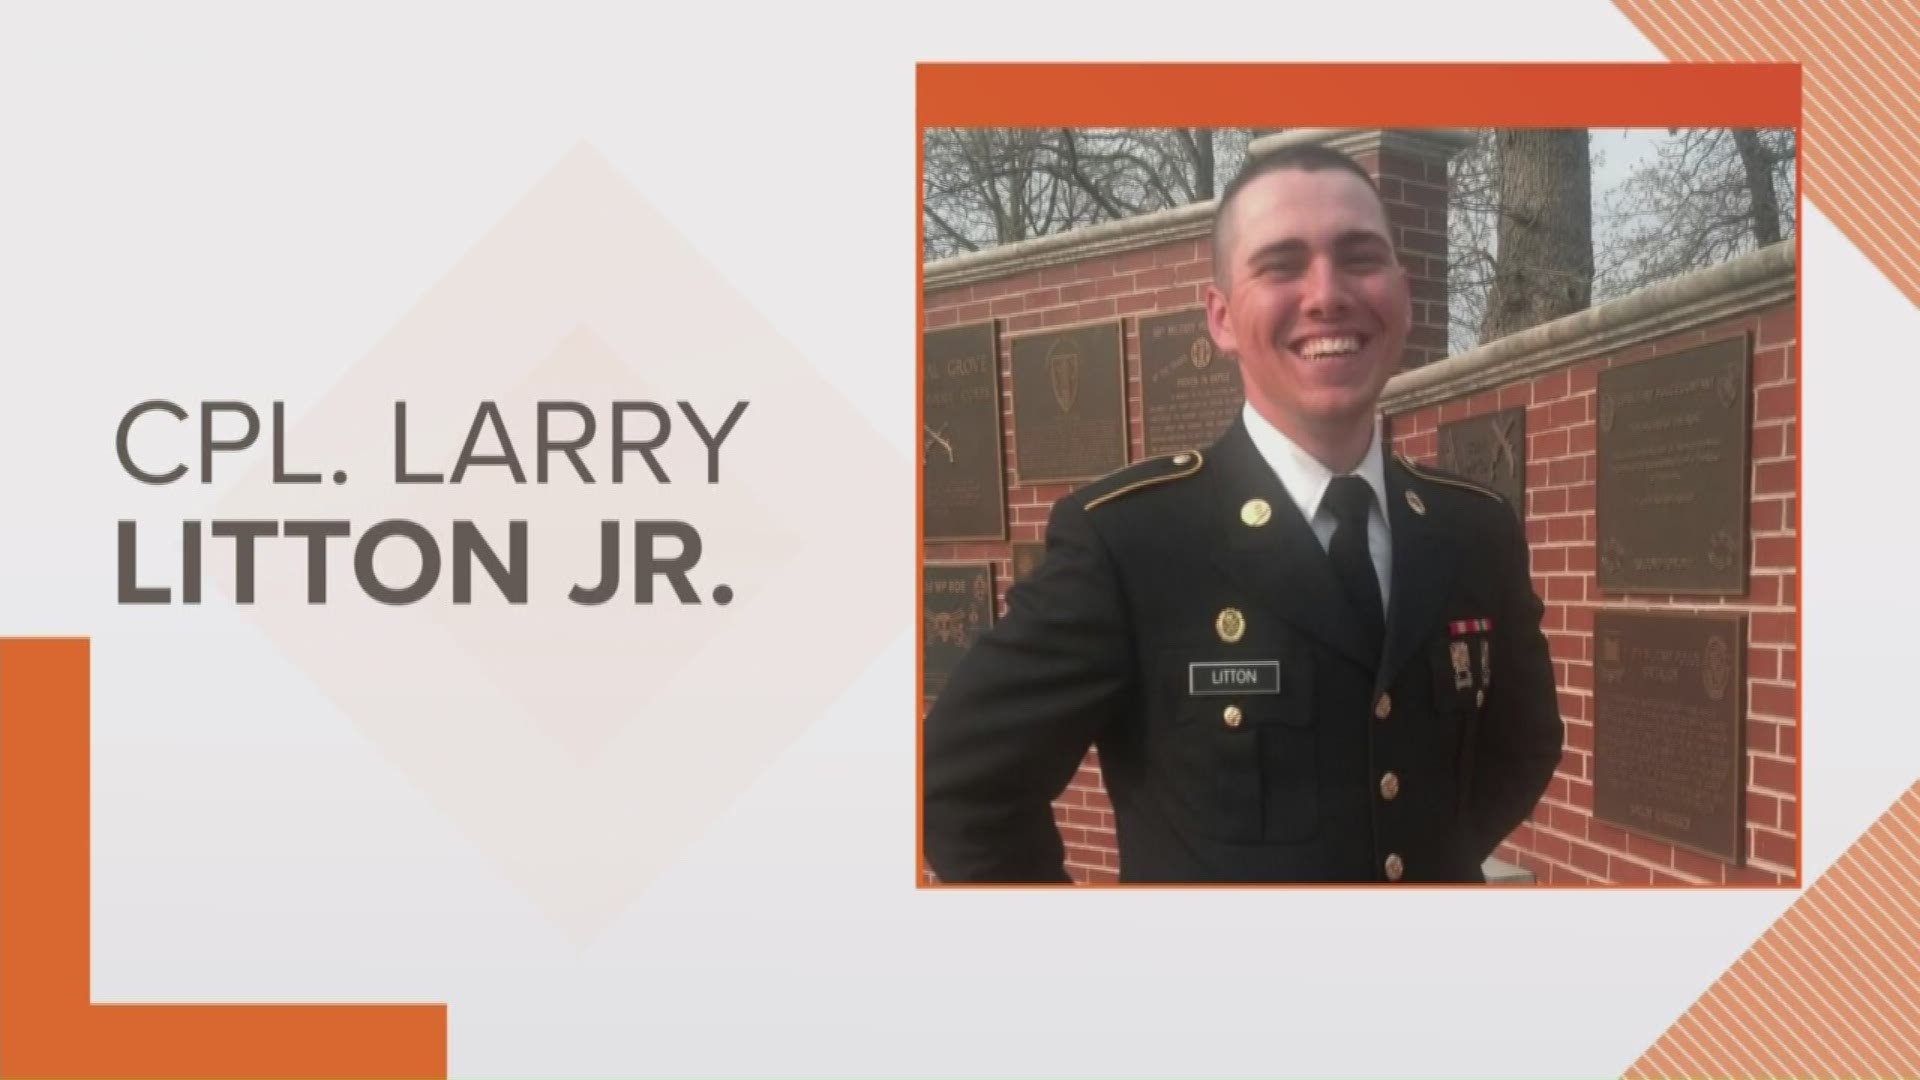 Officials say 29-year-old Corporal Larry Litton Junior of Martinsville, Indiana was found unresponsive December 7 at Muscatatuck Urban Training Center.